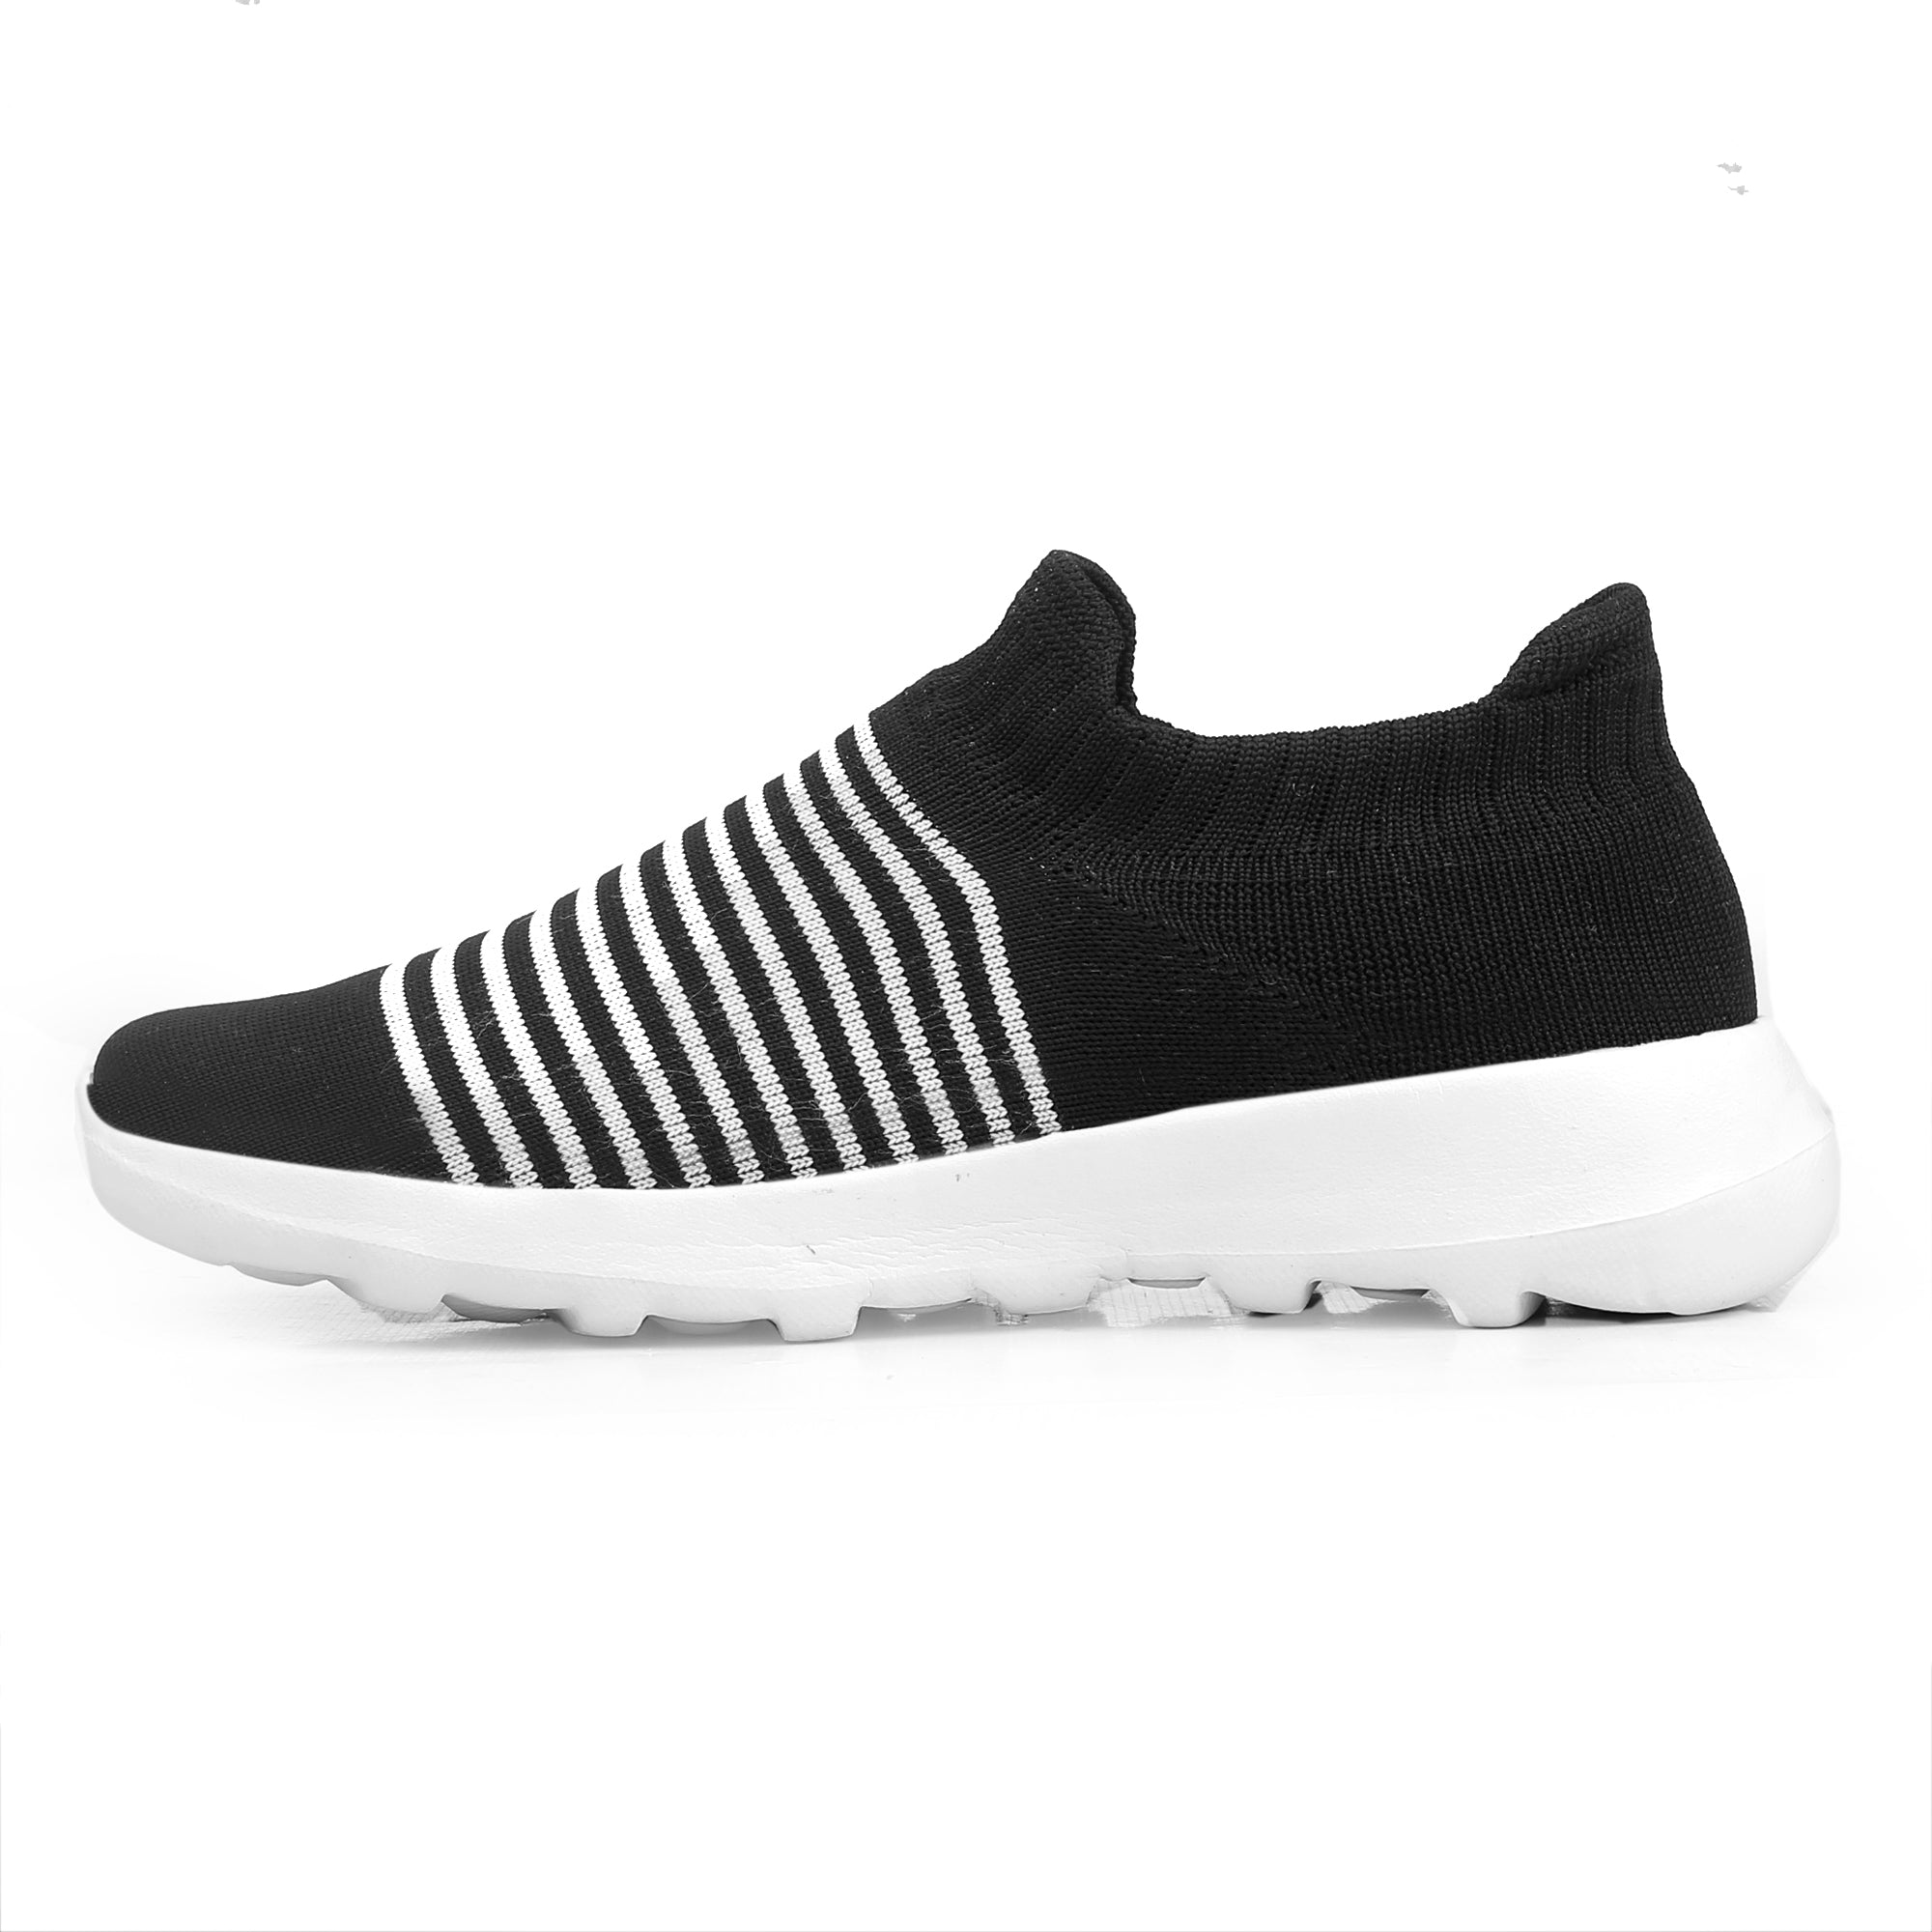 attitudist-black-light-weight-all-day-comfy-sports-shoes-for-men-20